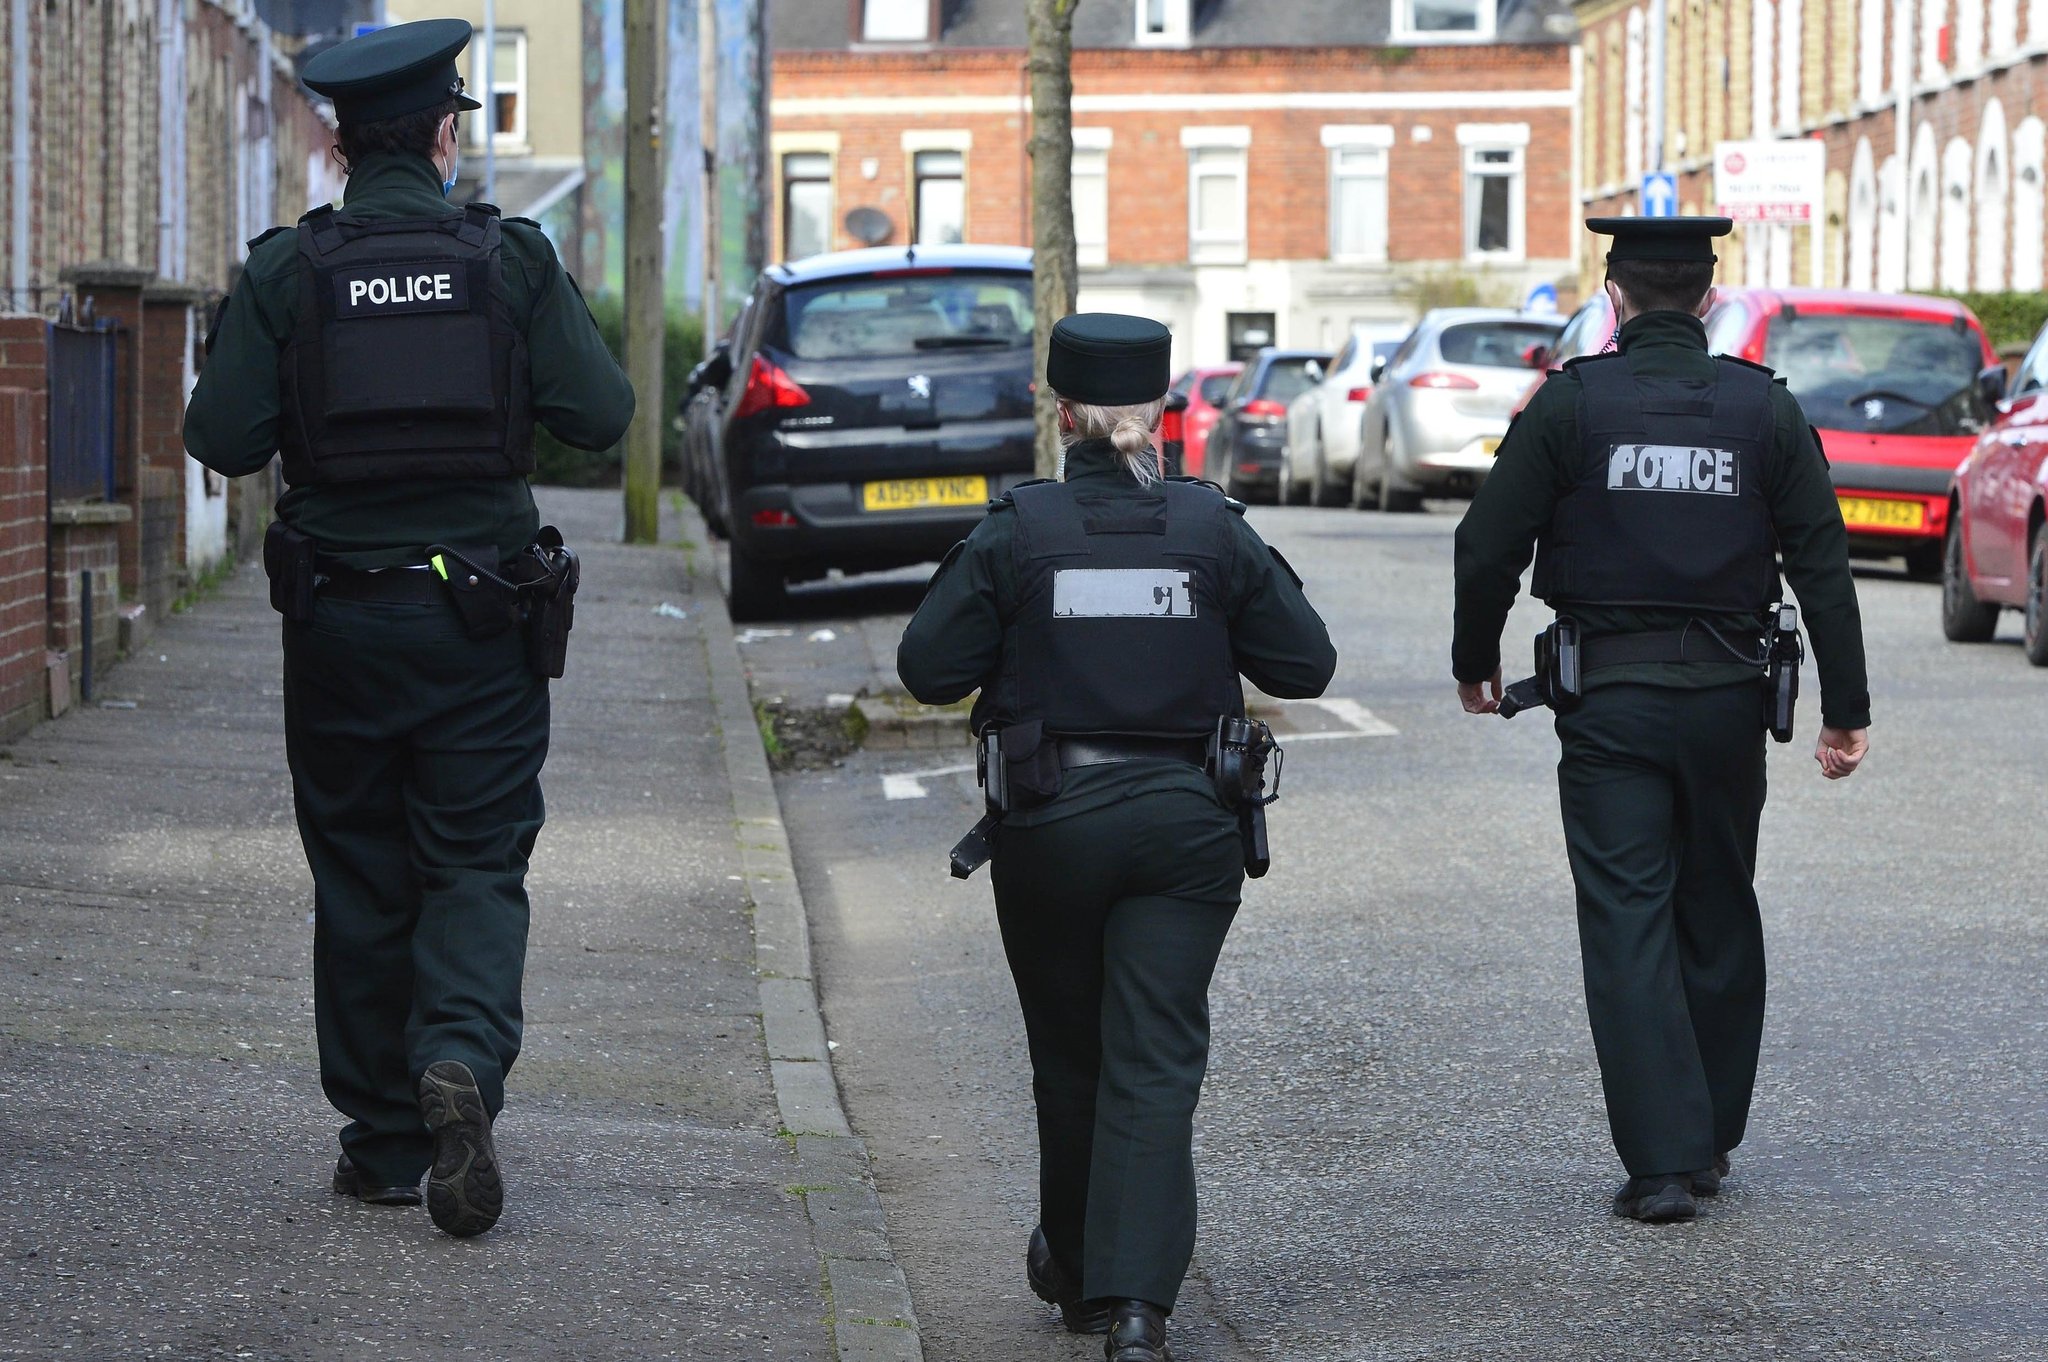 Decrease in number of people who feel PSNI 'keeping them safe'